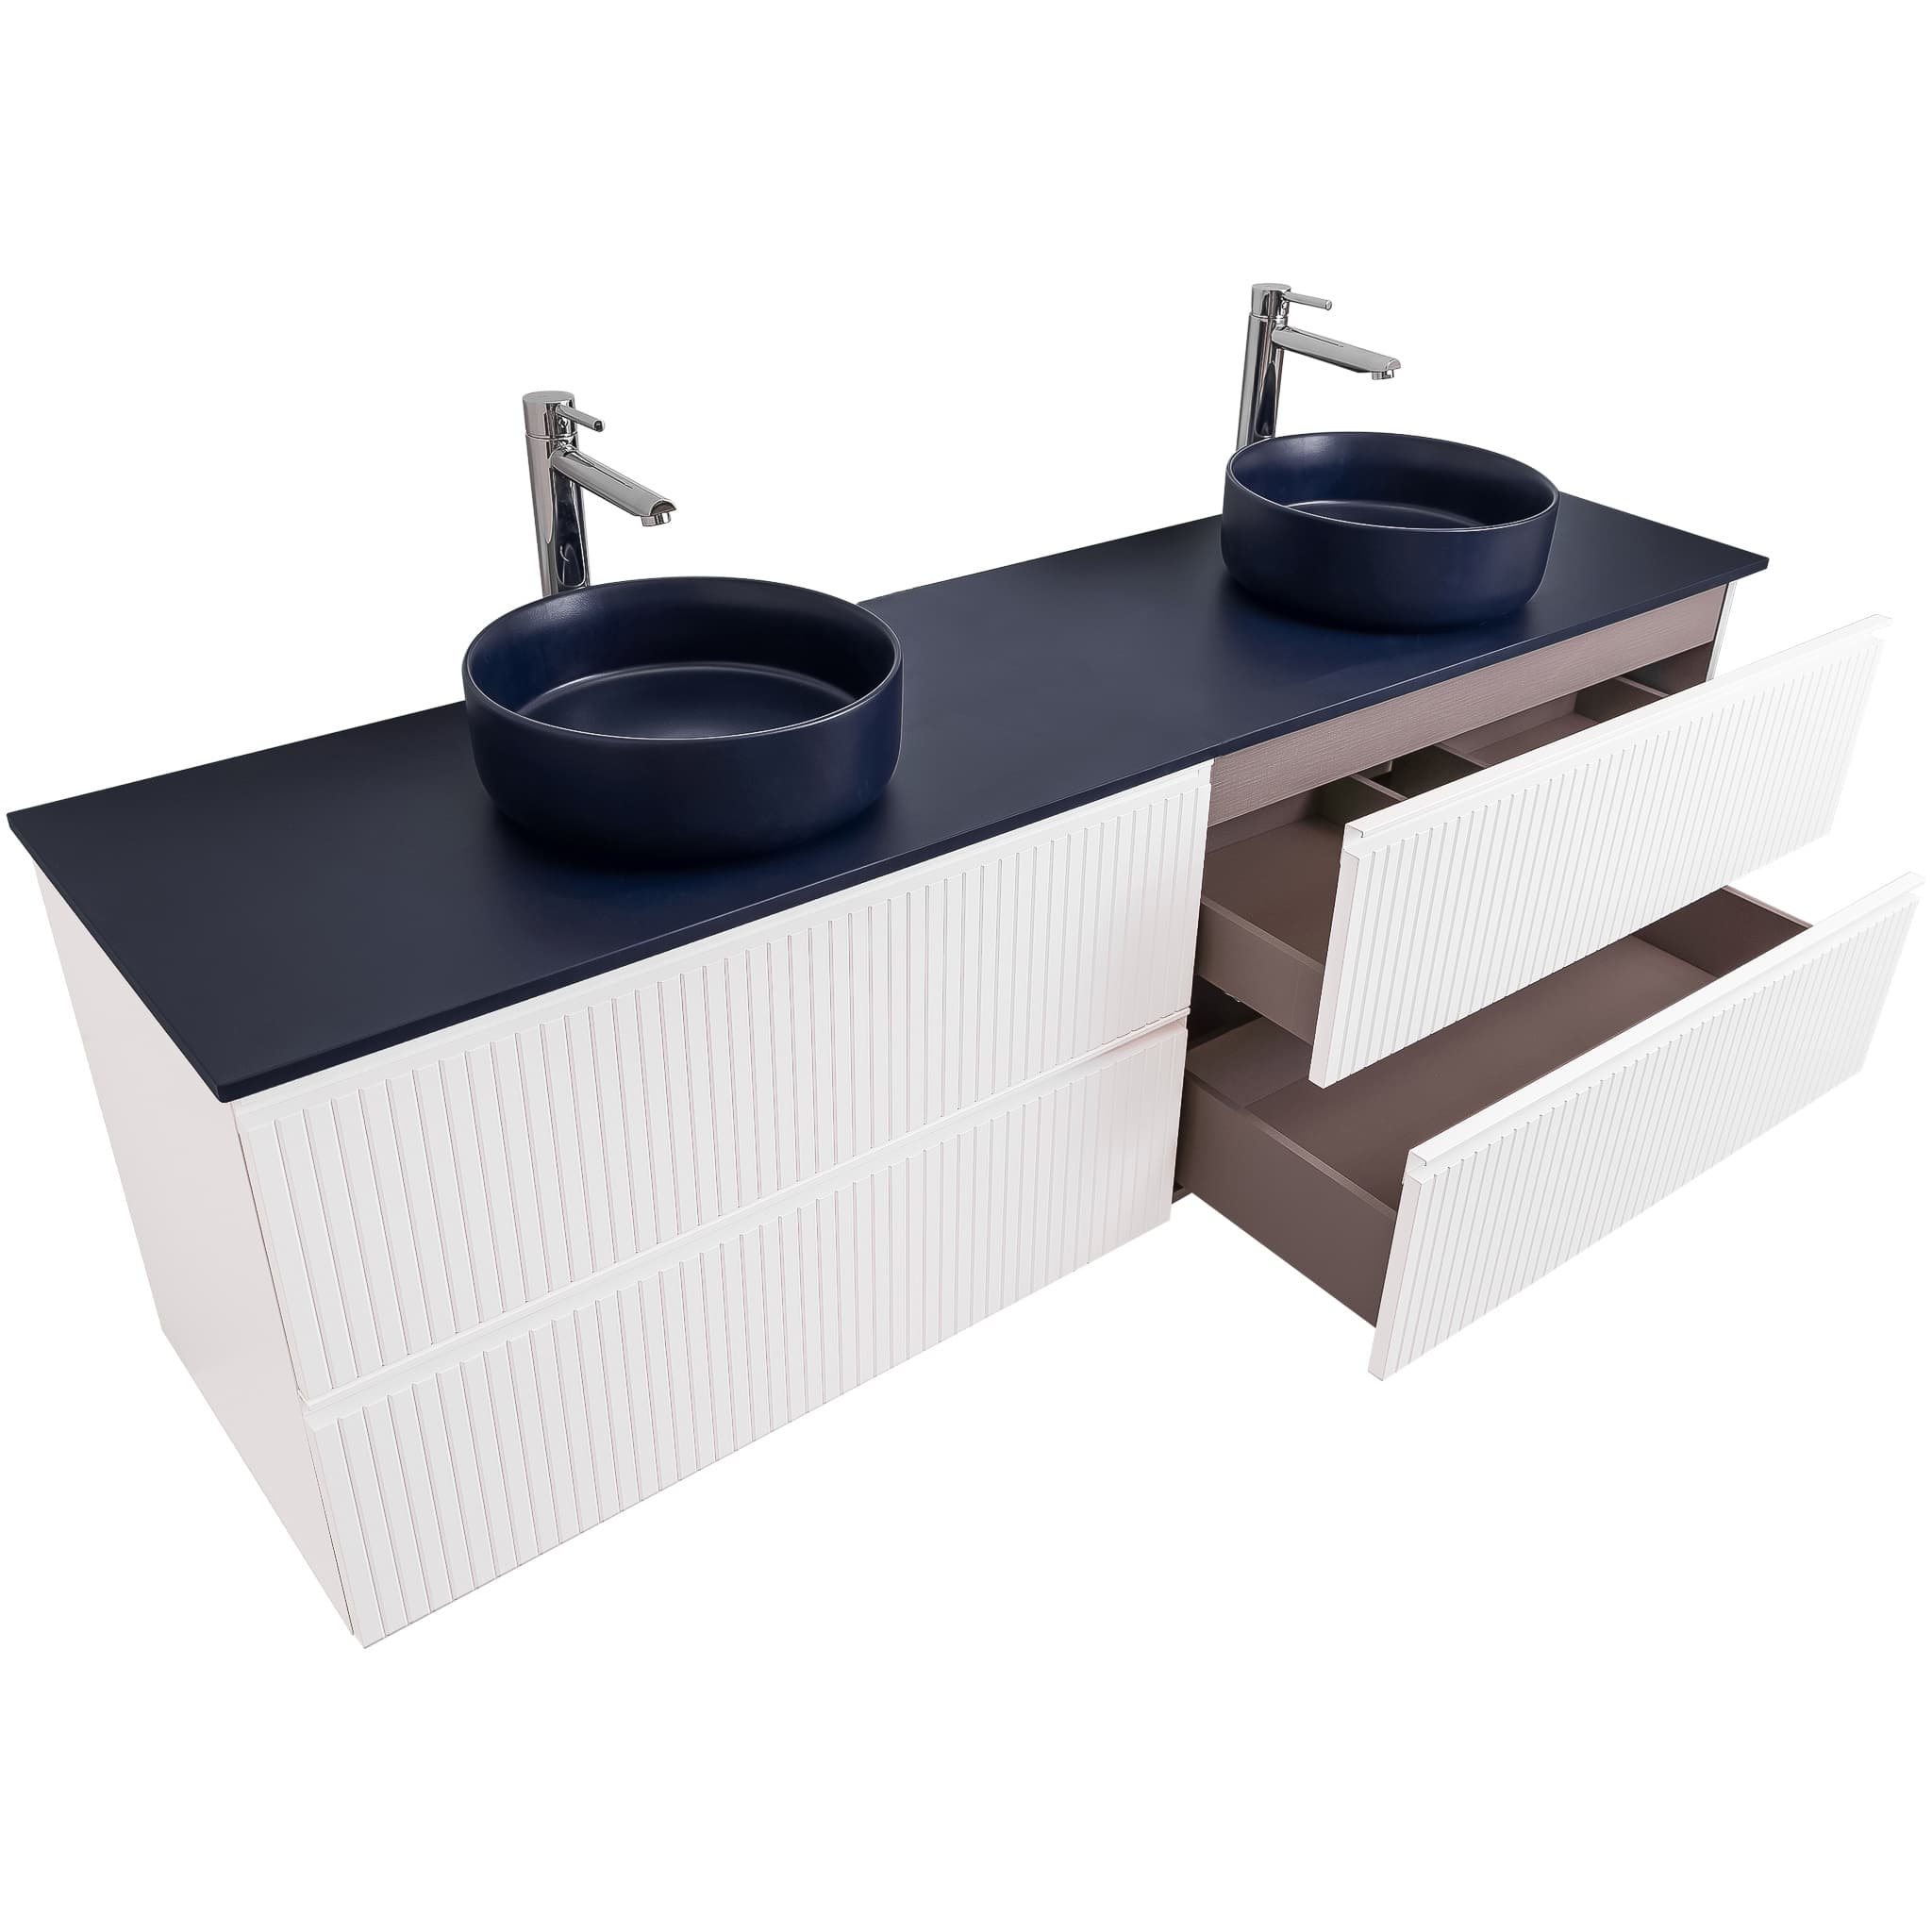 Ares 63 Matte White Cabinet, Ares Navy Blue Top And Two Ares Navy Blue Ceramic Basin, Wall Mounted Modern Vanity Set